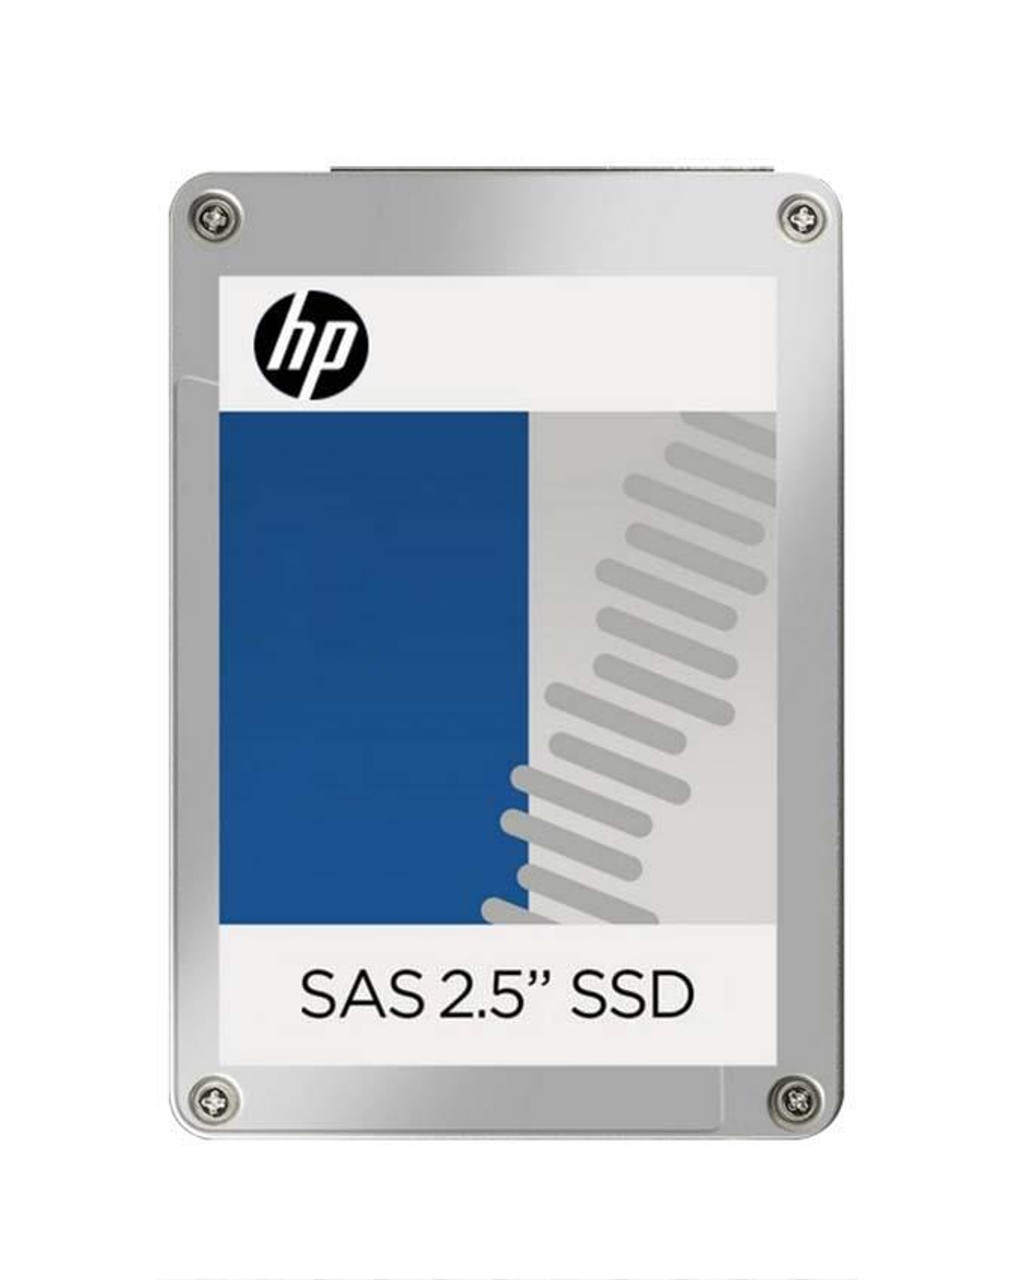 E7Y55A#0D1 HP 480GB cMLC SAS 6Gbps 2.5-inch Internal Solid State Drive (SSD) for 3PAR StoreServ M6710